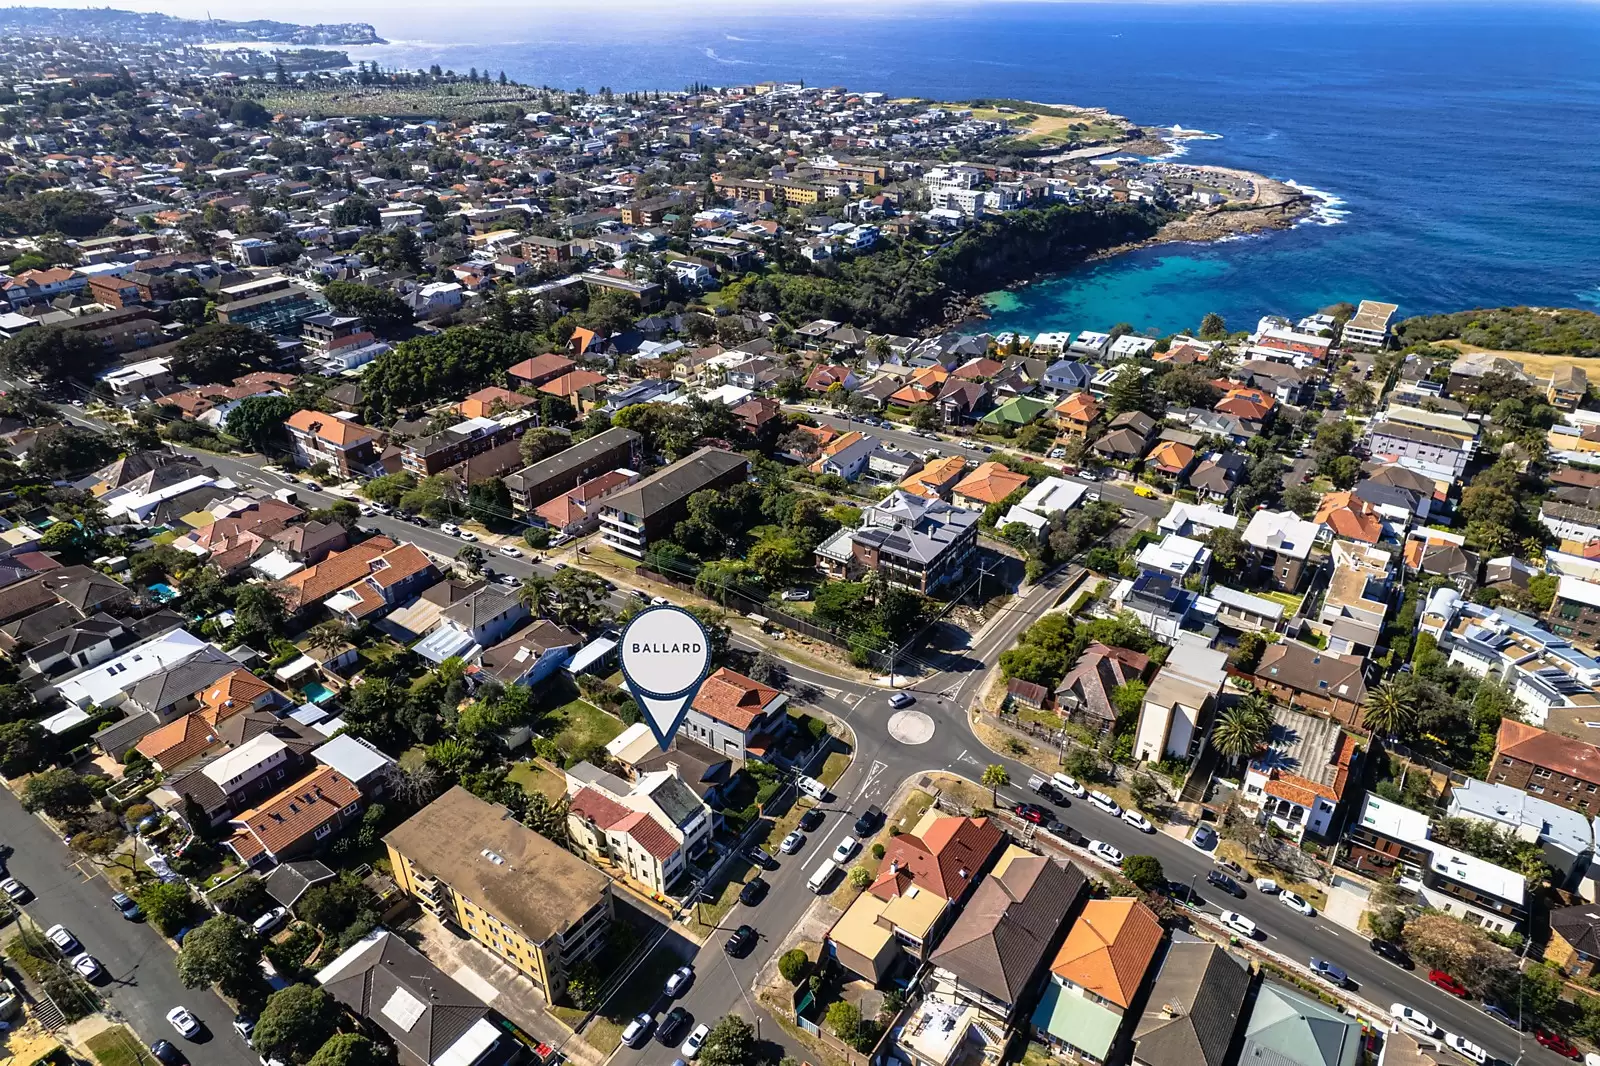 Photo #16: 366 Alison Road, Coogee - Sold by Sydney Sotheby's International Realty